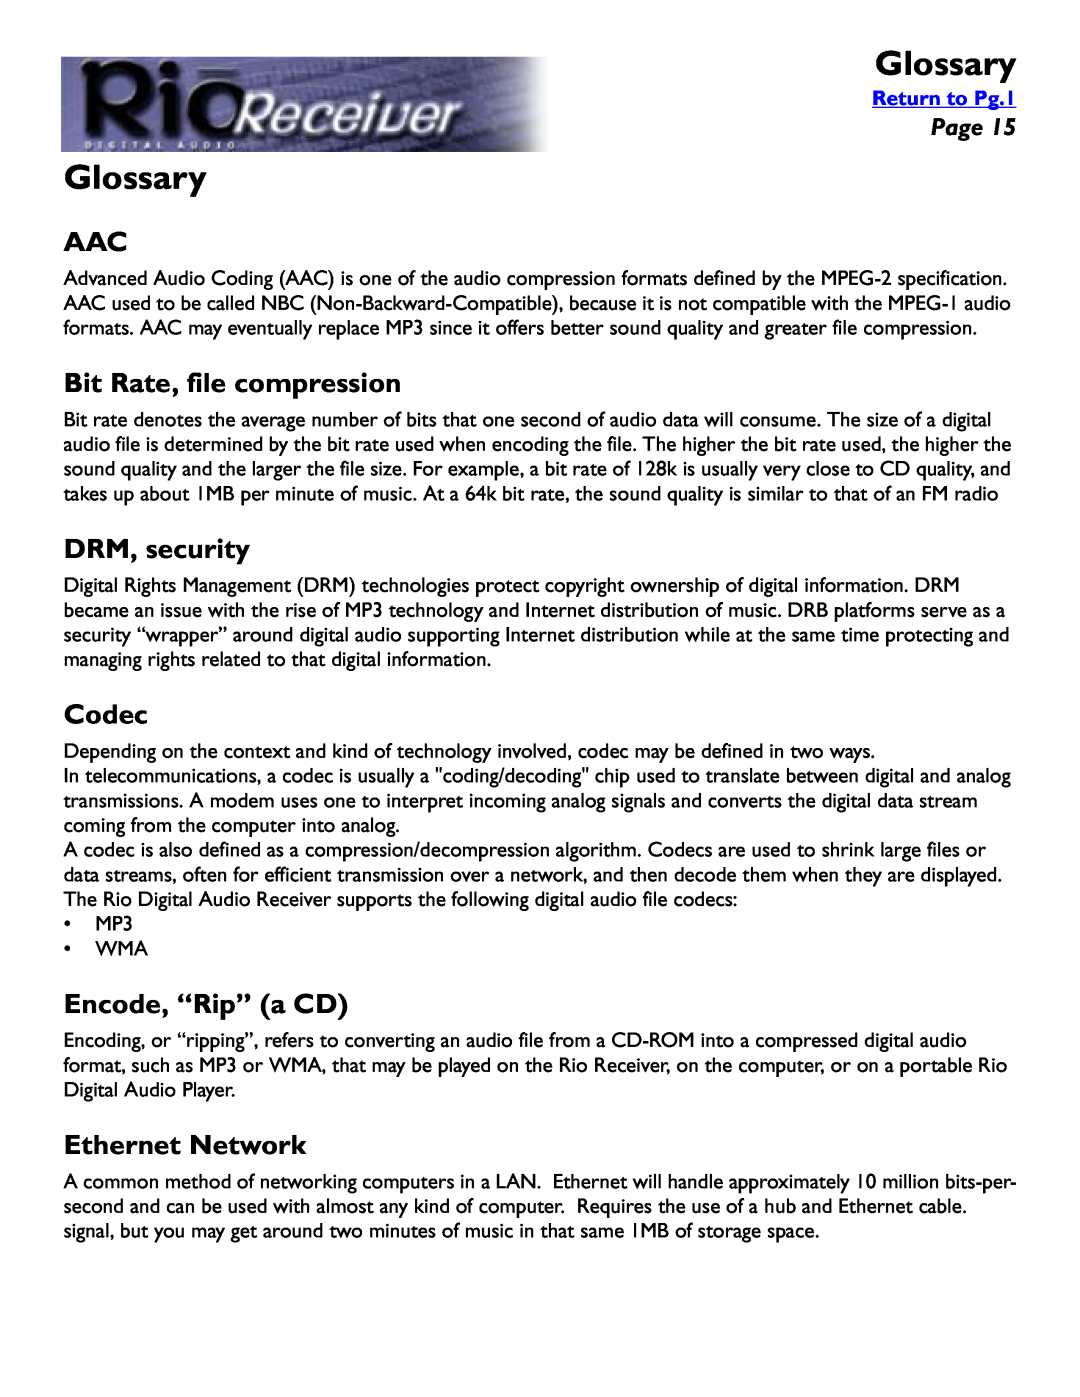 Rio Audio Digital Audio Receiver Glossary, Bit Rate, file compression, DRM, security, Codec, Encode, “Rip” a CD, Page 